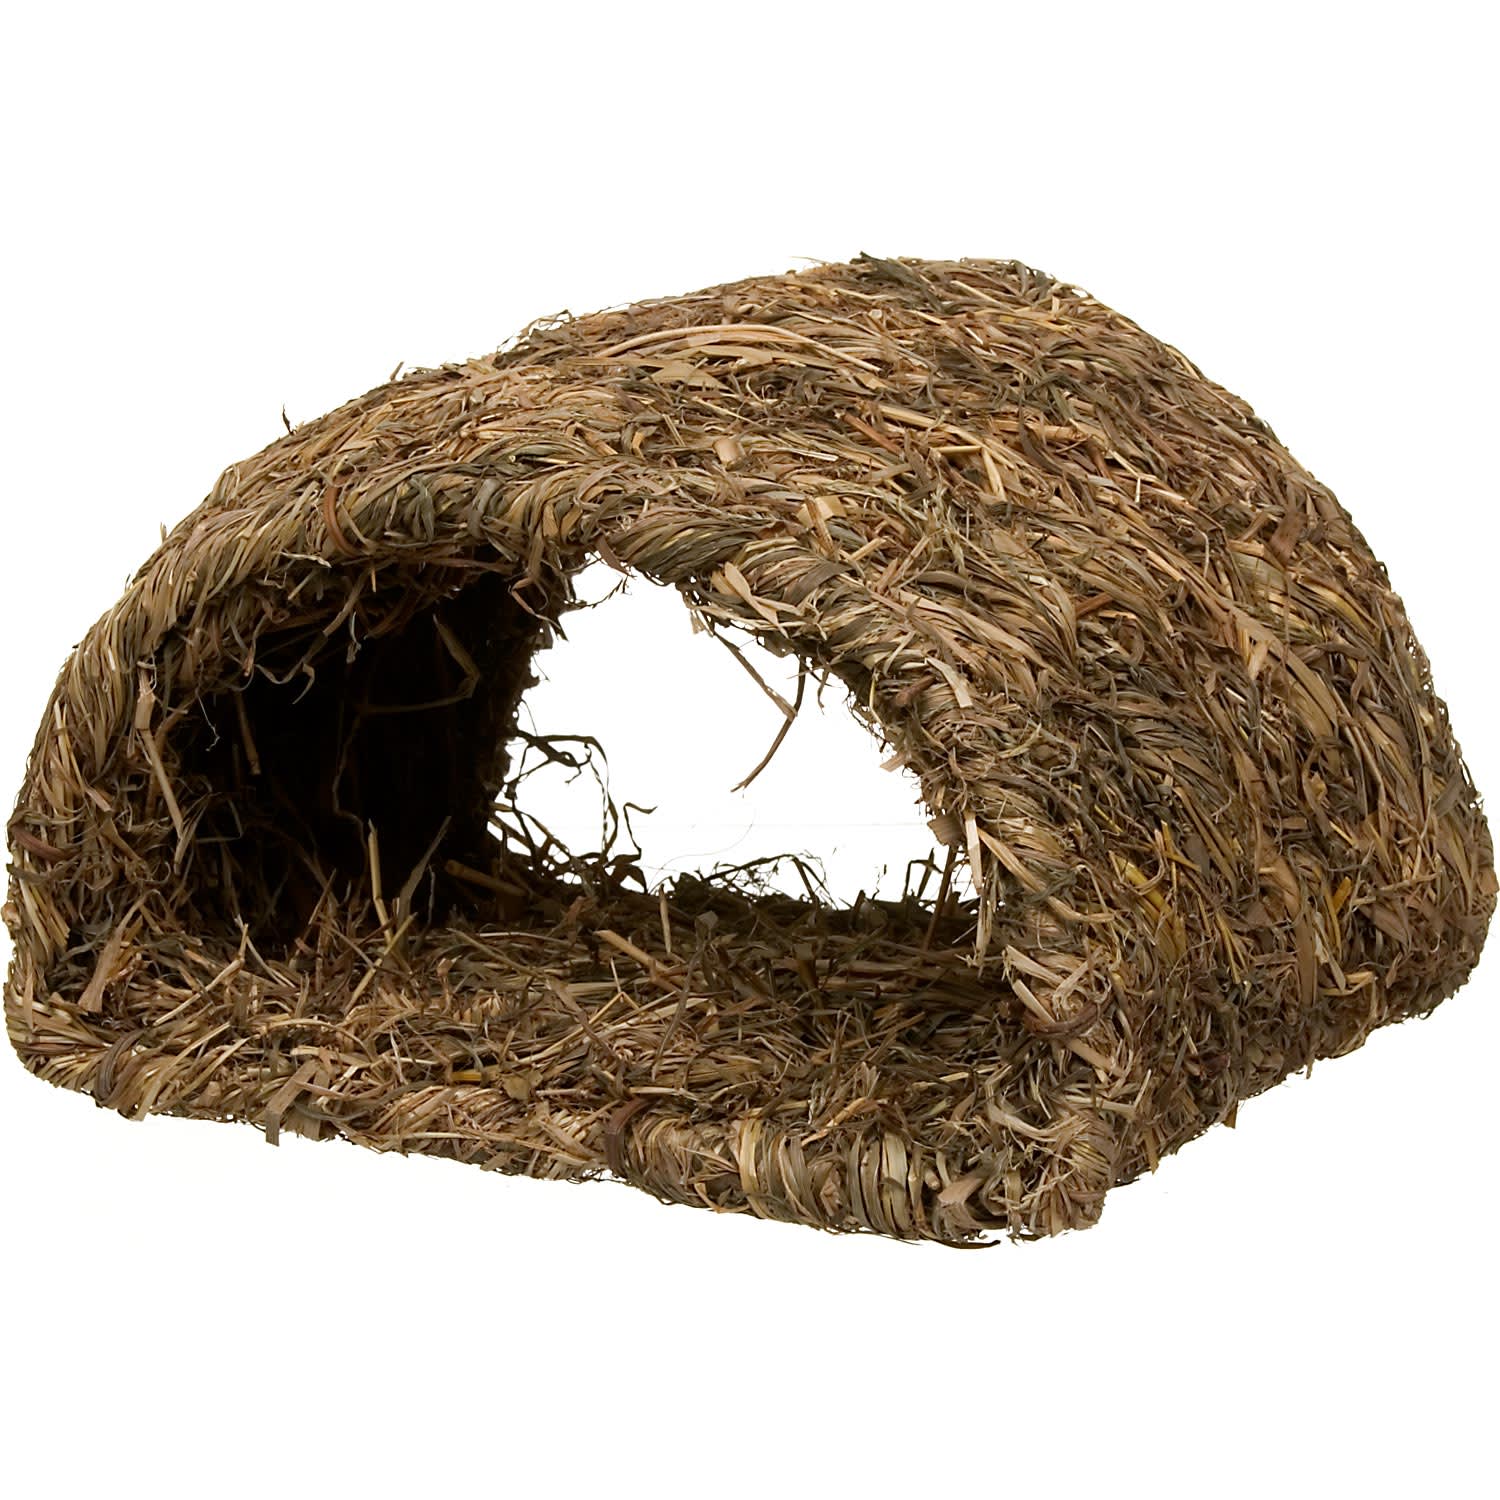 UPC 766501005325 product image for Peter's Woven Grass Hide-A-Way Hut for Rabbits, 9.25 IN, Green | upcitemdb.com